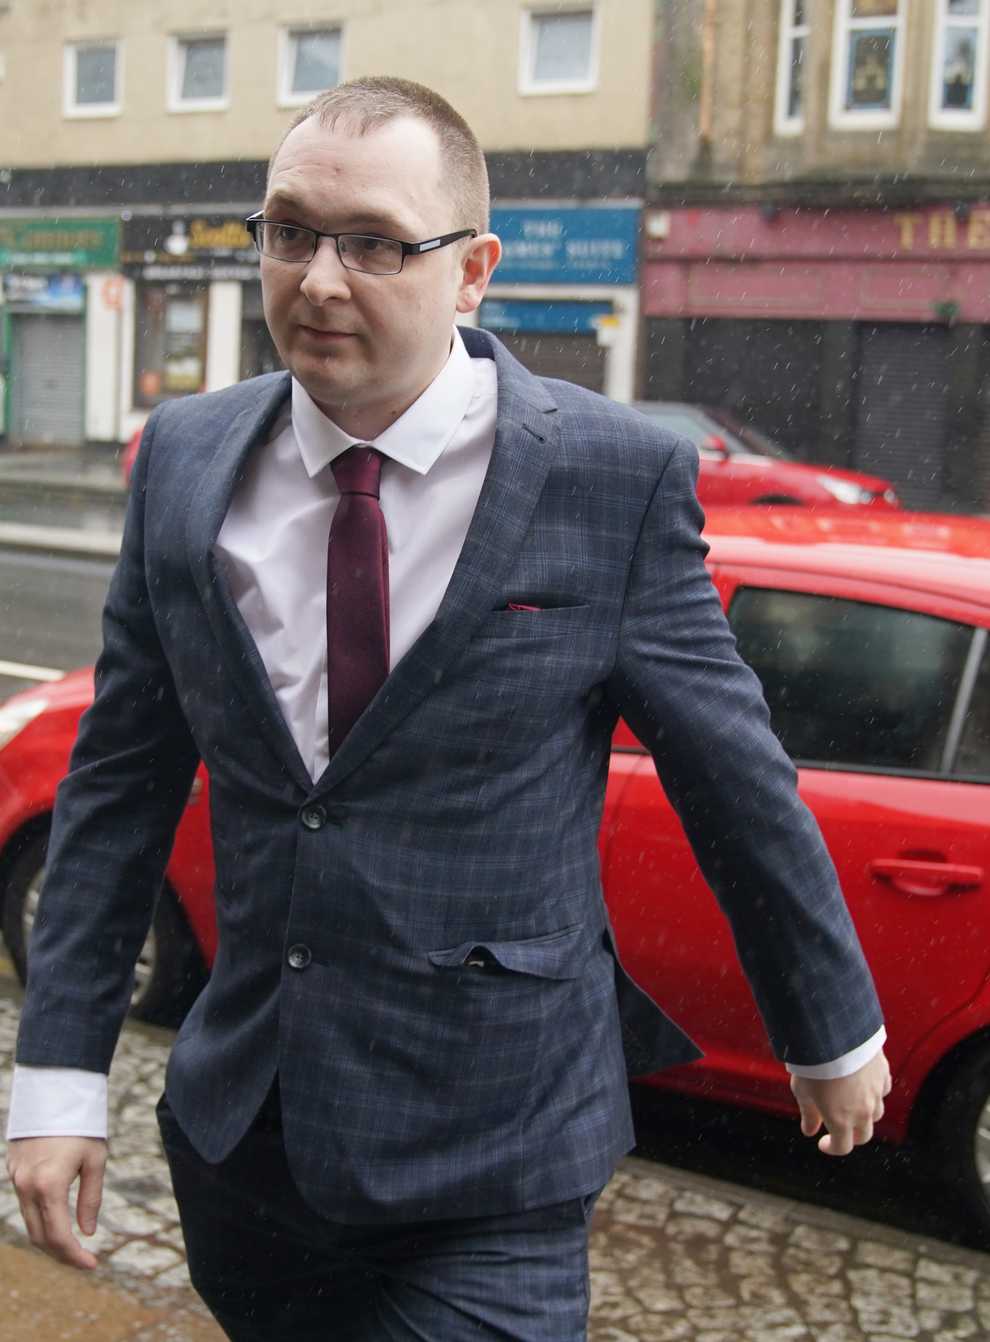 Christopher O’Malley arriving at Paisley Sheriff Court for the fatal accident inquiry into the Cameron House hotel fire (Andrew Milligan/PA)